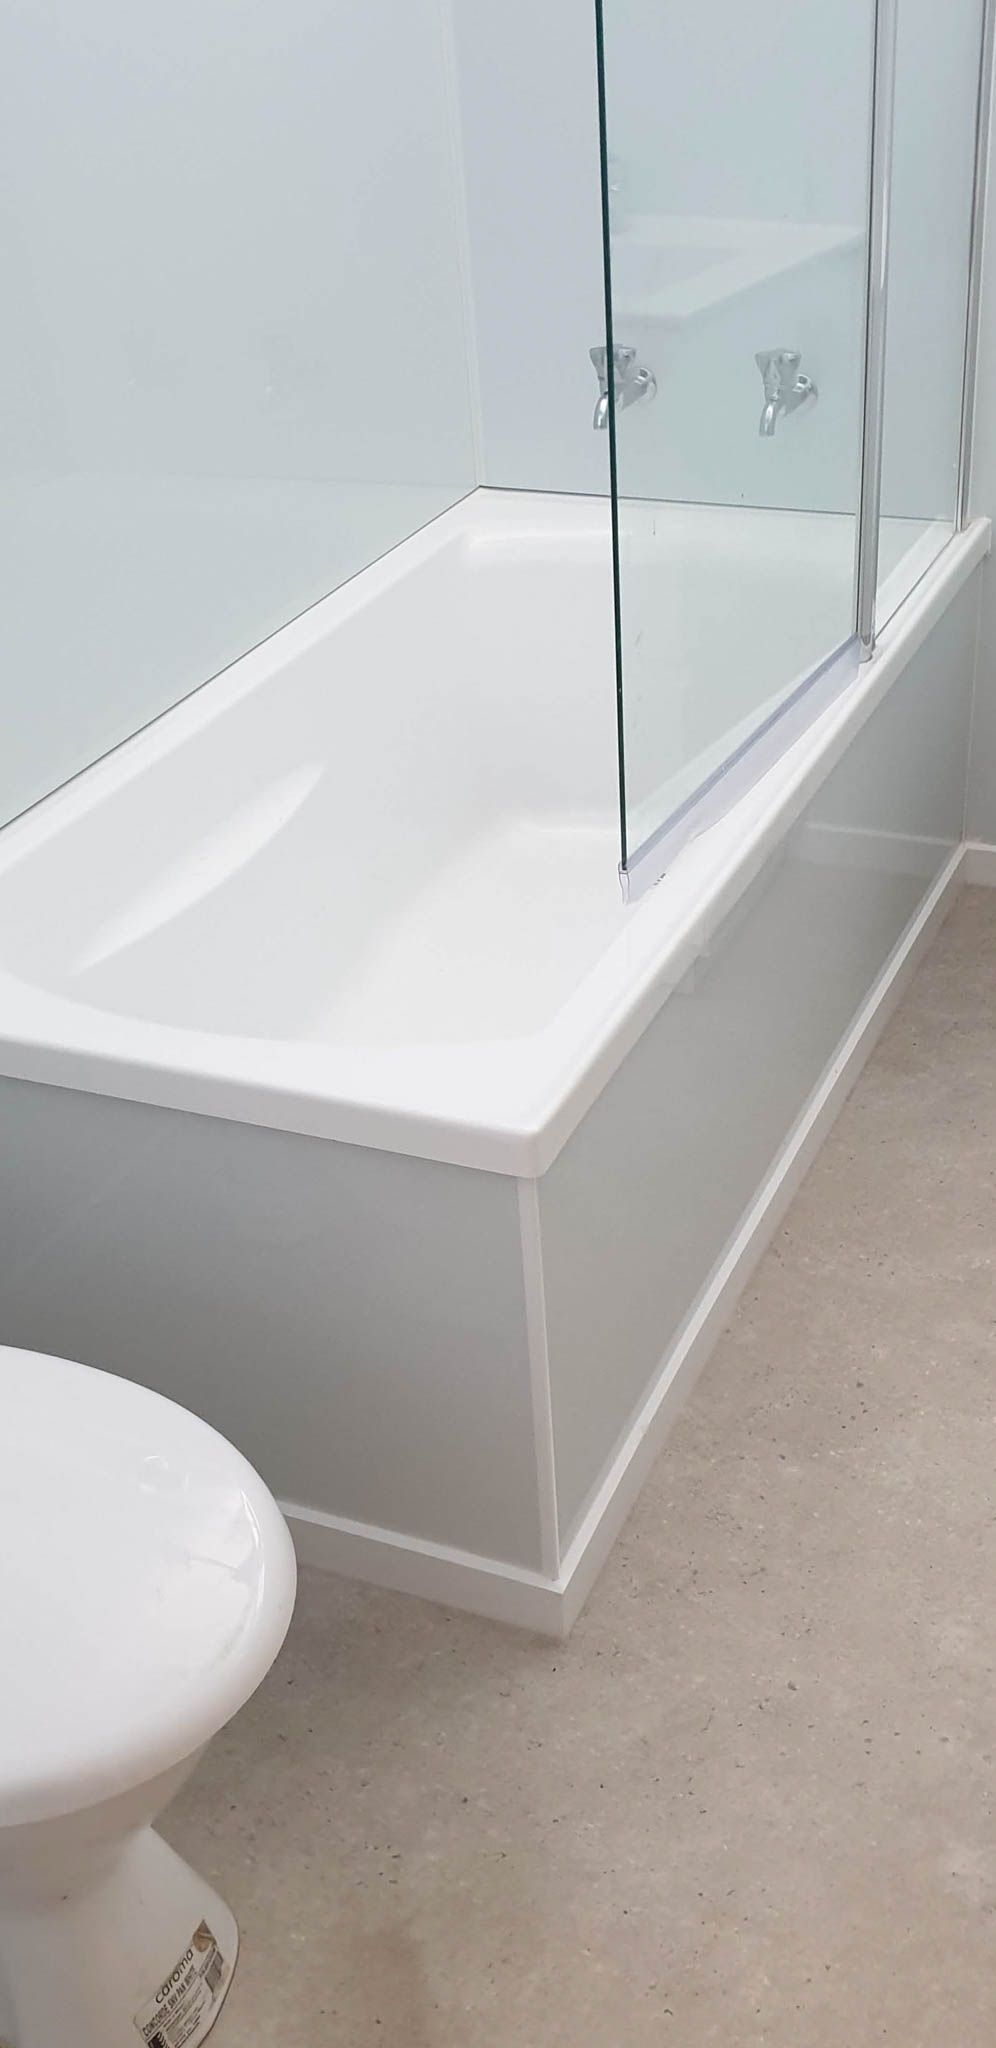 Showcasing a fusion of practical design and sleek aesthetics, this bathroom features a bath and shower area secured by a transparent glass door. The surrounding walls are fitted with Aluminum Composite Panel sheets, chosen for their superior waterproof qualities and durability. The floor boasts a hard-wearing vinyl covering, selected for its longevity and ease of cleaning, perfect for a busy bathroom setting.